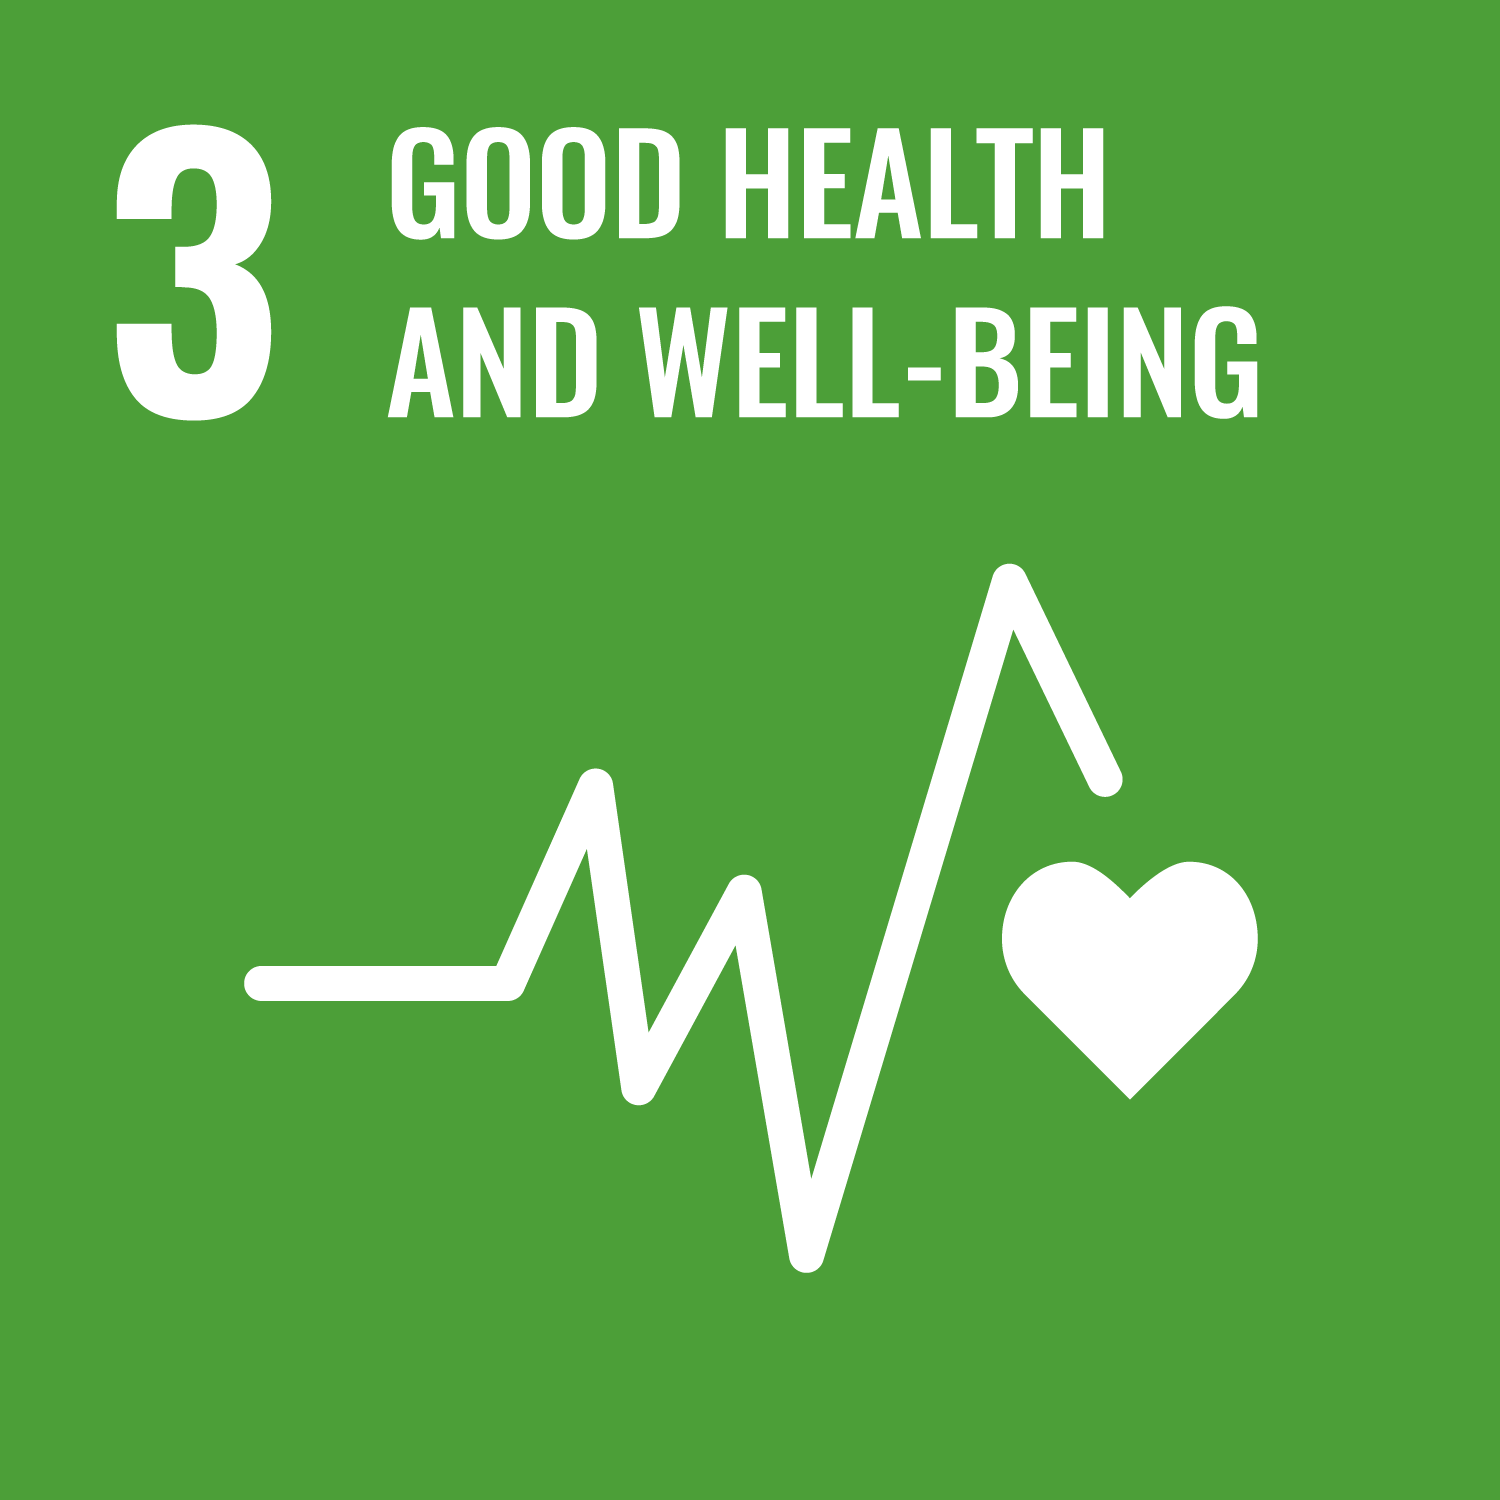 03 - Good Health And Well-Being